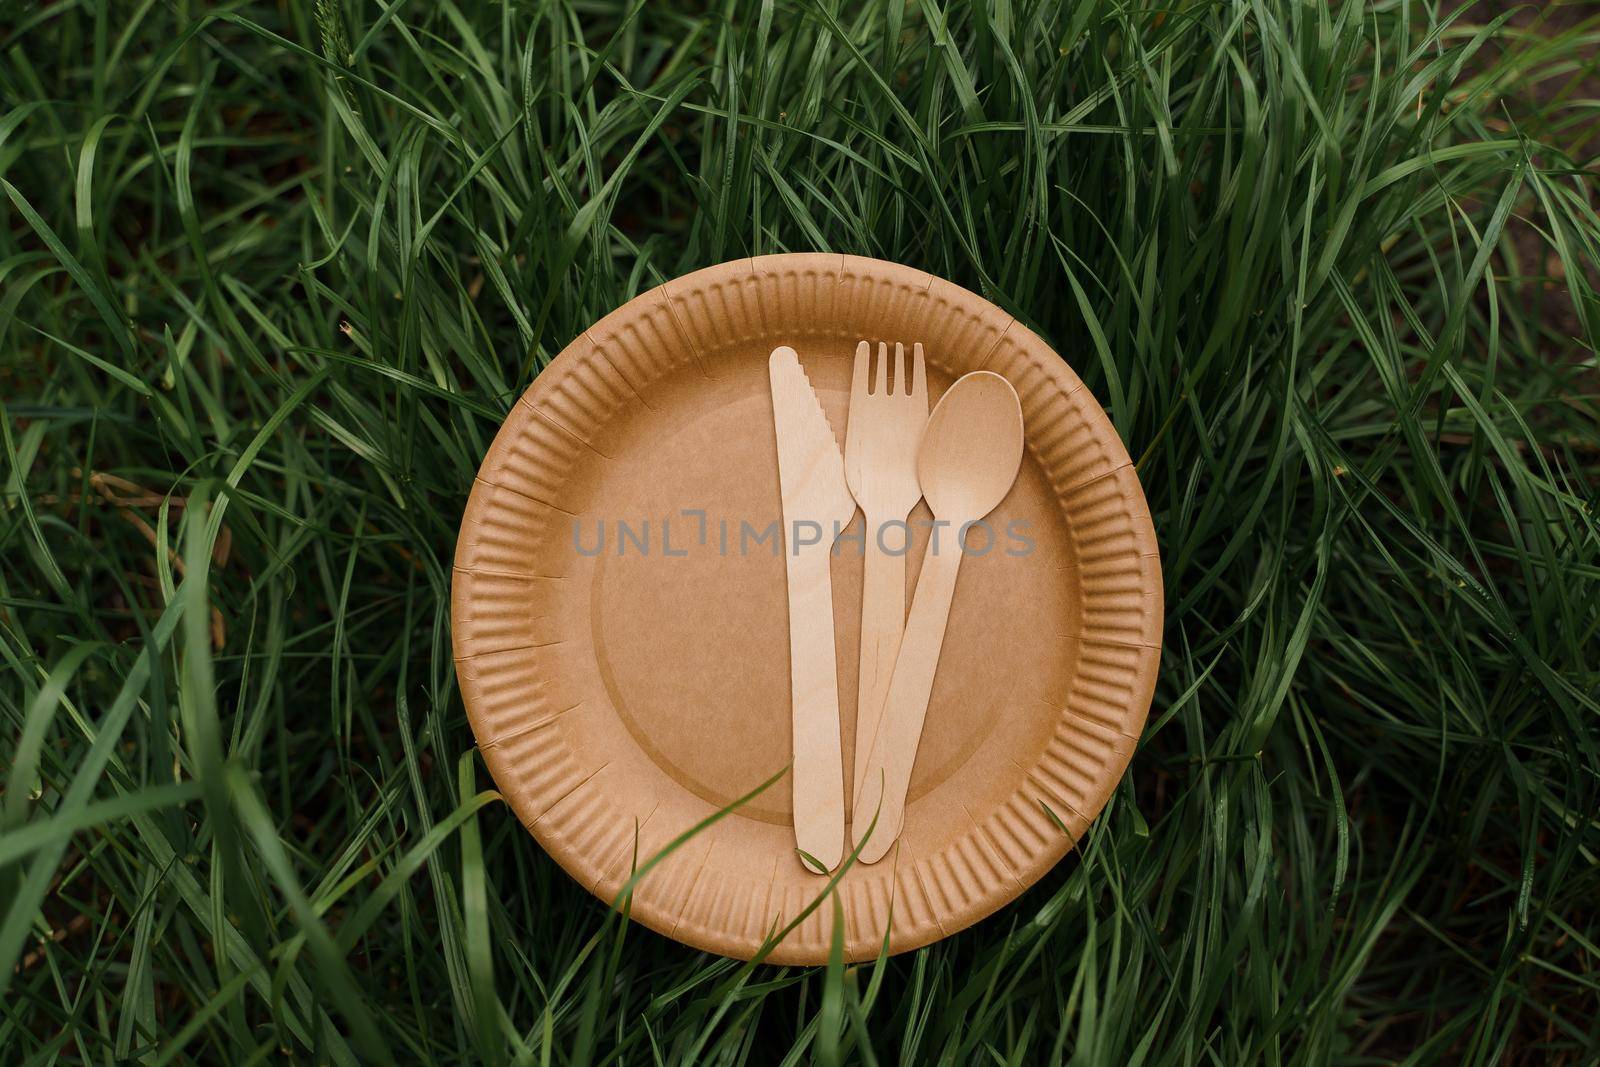 Eco-friendly natural plate with spoon, fork, knife. Set of disposable ecological dishes on green grass background. Sustainability of planet